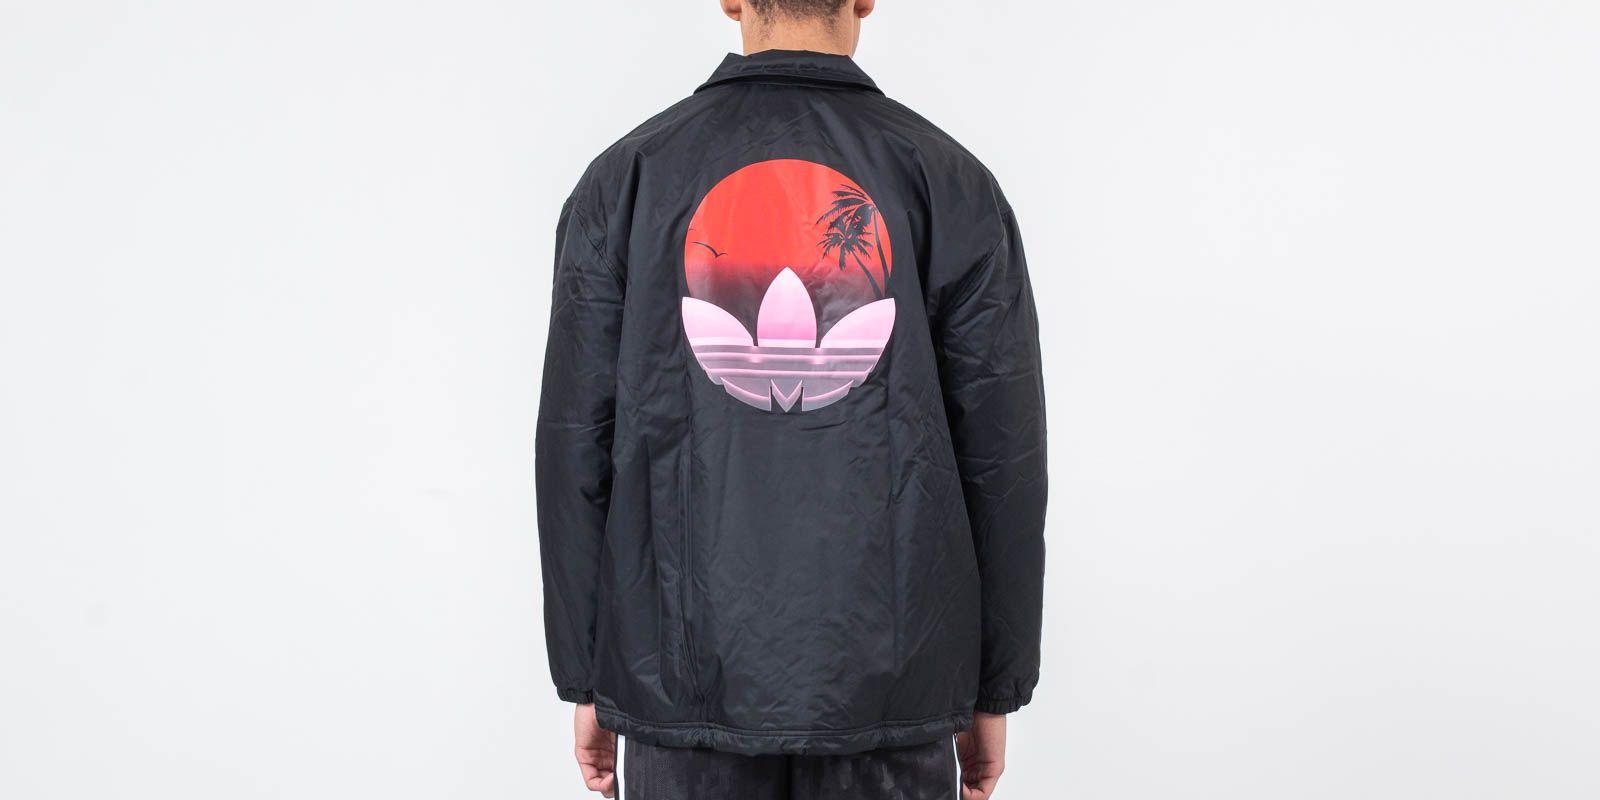 Adidas Tropical Jacket Outlet, SAVE 59% - aveclumiere.com